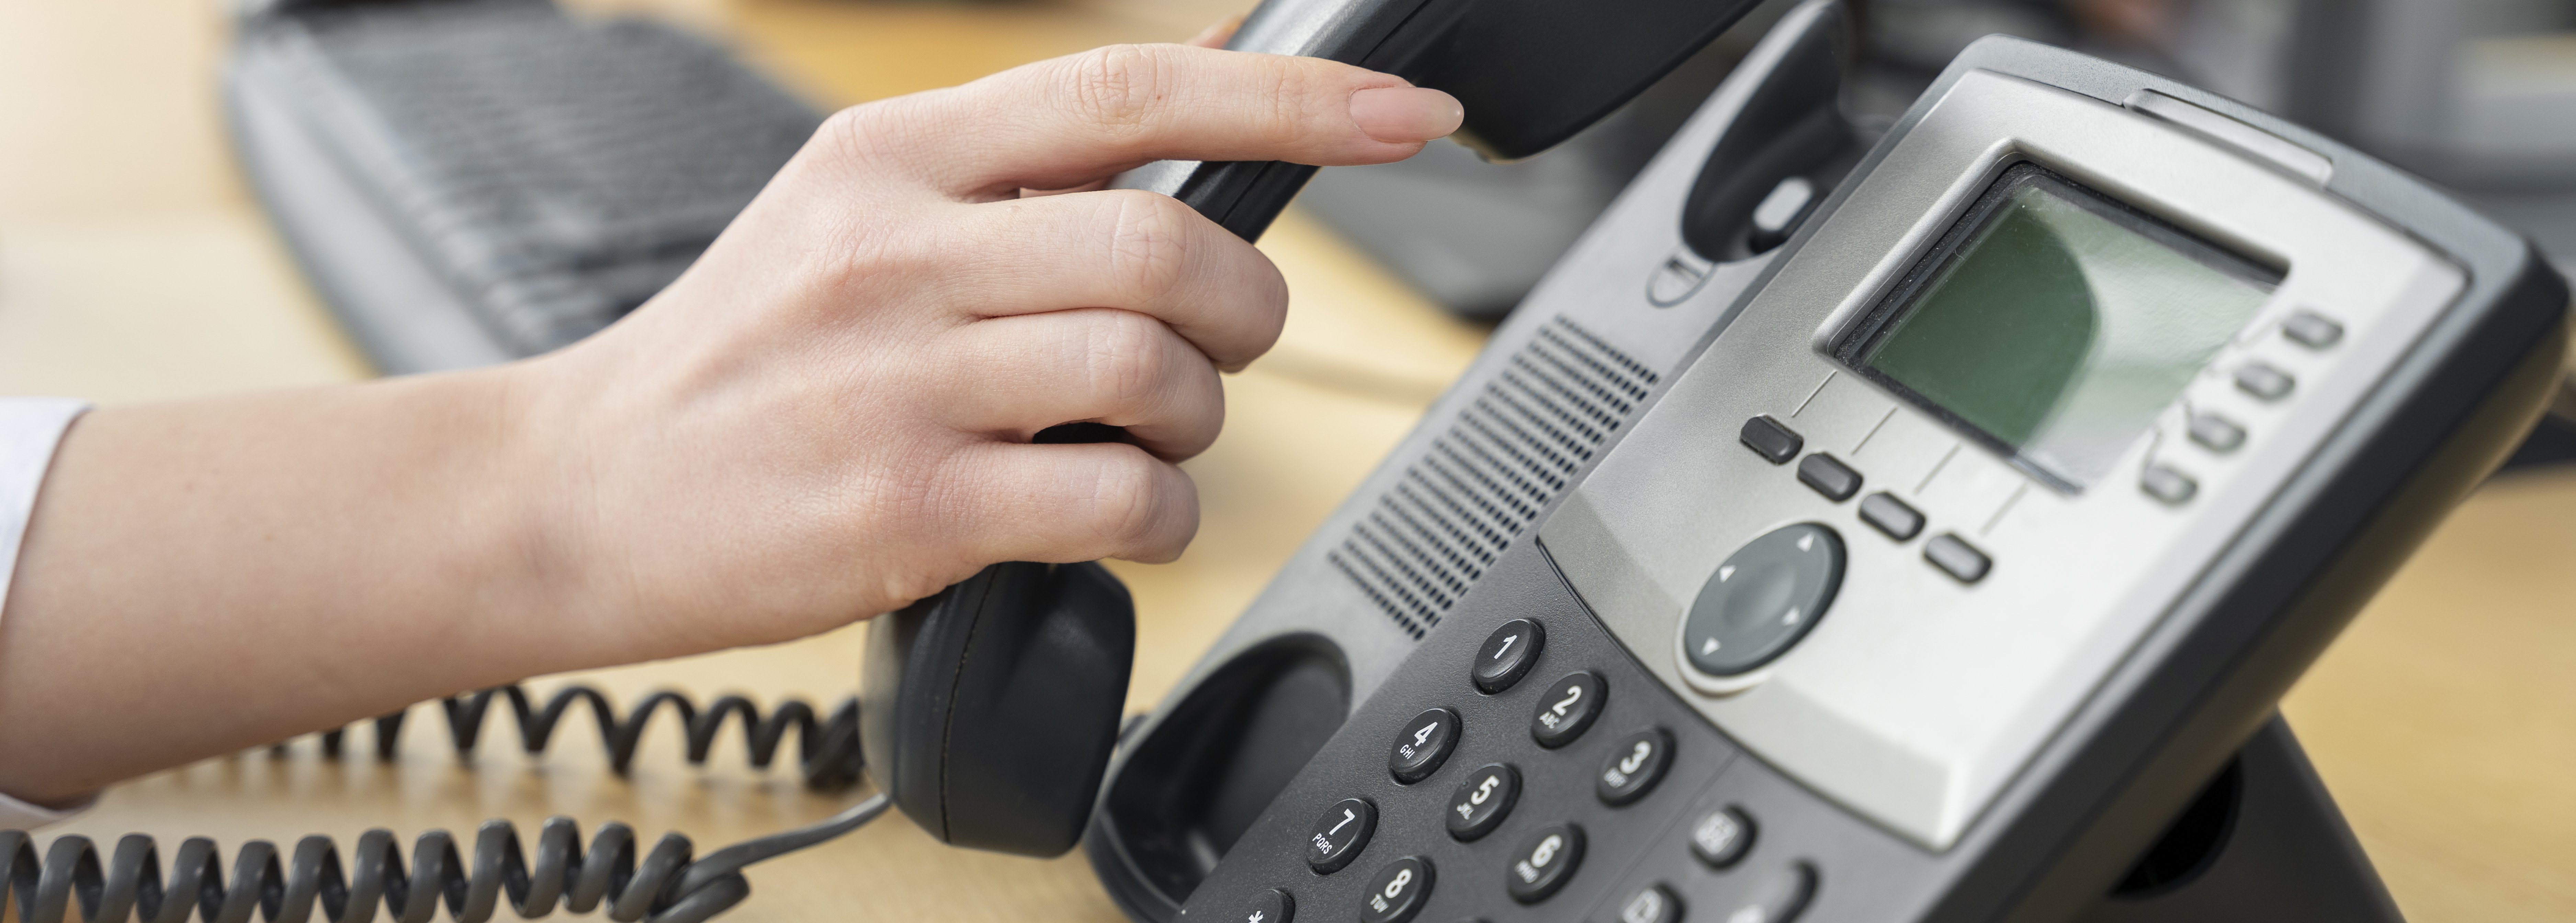 How To Stop Call Forwarding  Knot Networks LLC